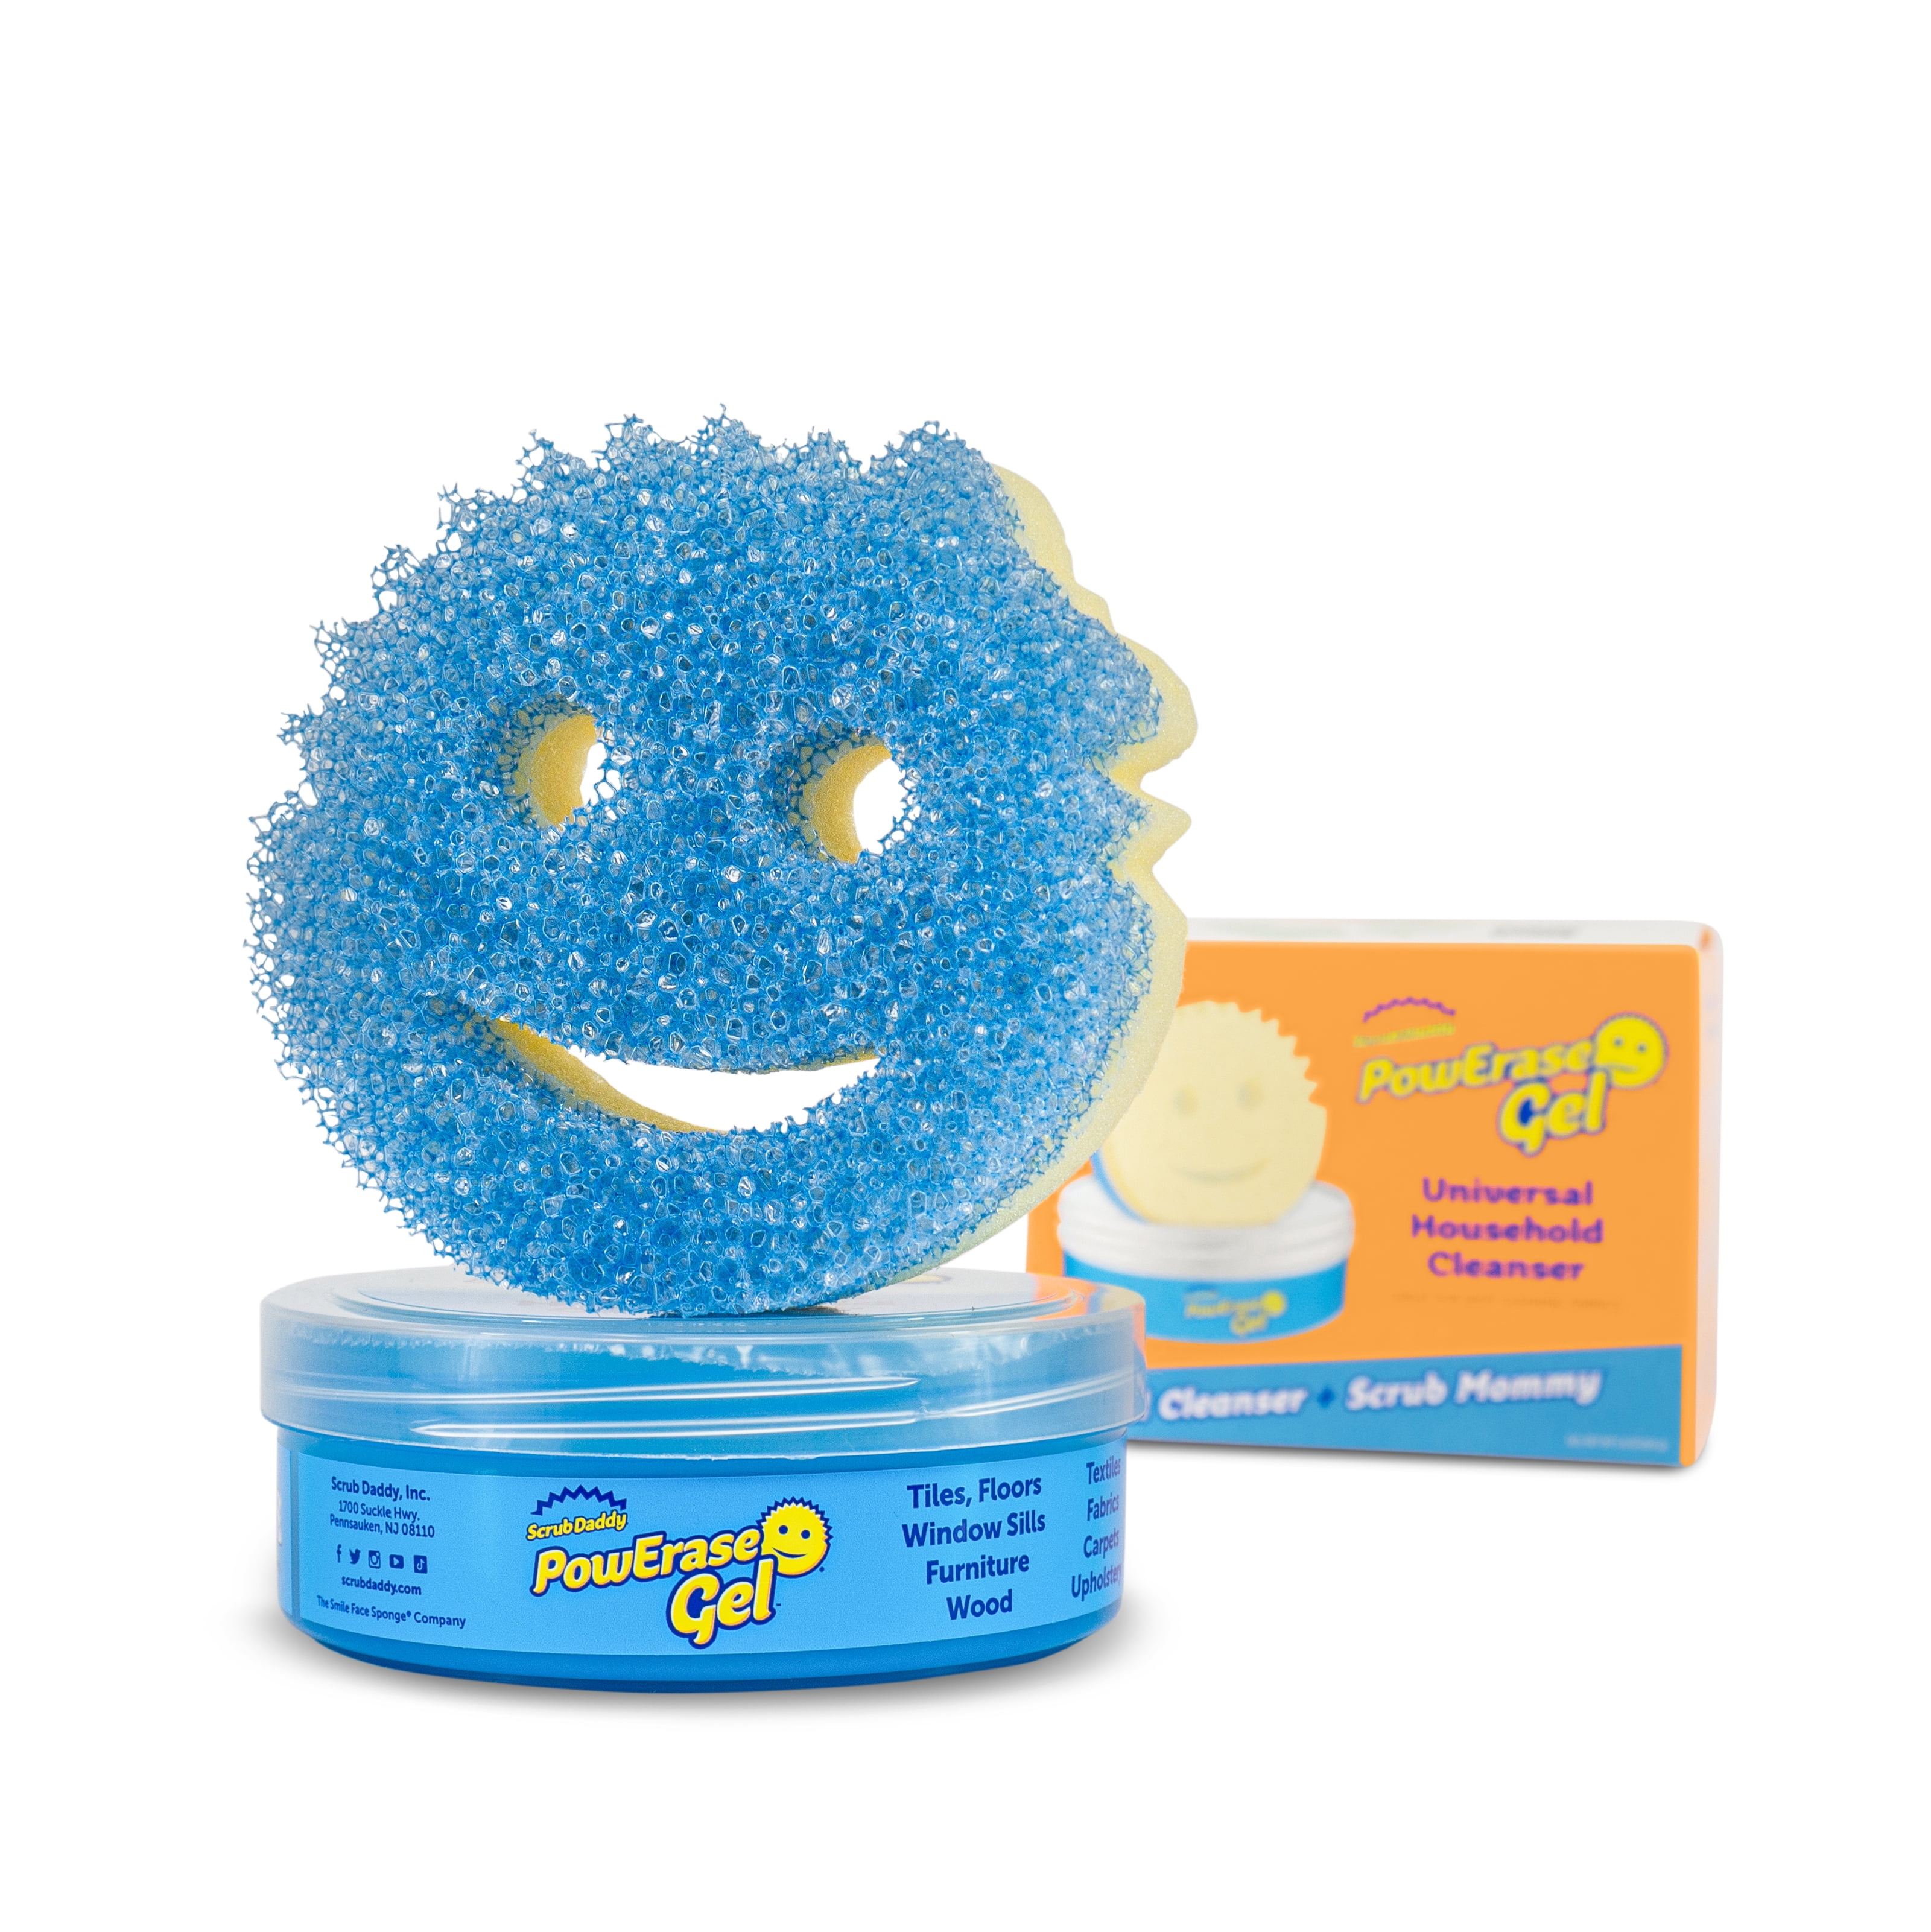 Scrub Daddy PowerPaste and Scrub Mommy Sponge Polymer Foam Sponge in the  Sponges & Scouring Pads department at